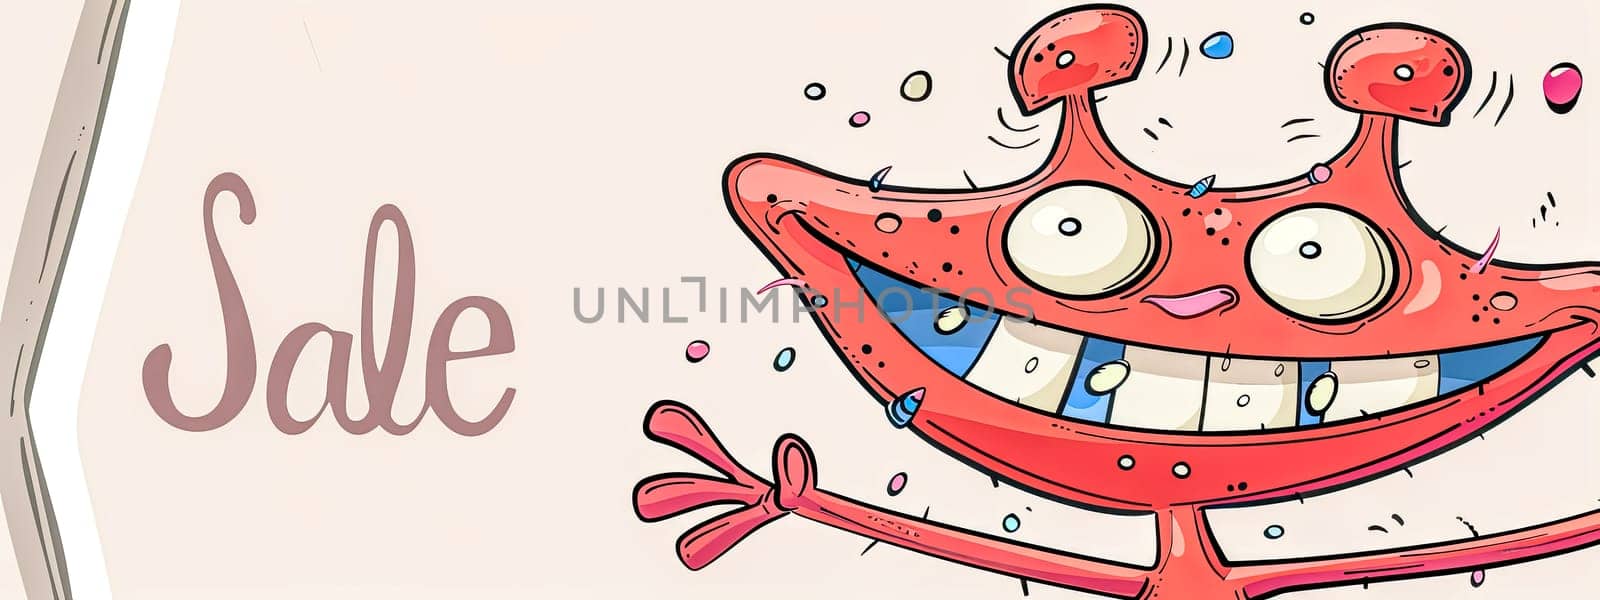 Playful pink cartoon crab character with big eyes celebrating a sale on a pastel background